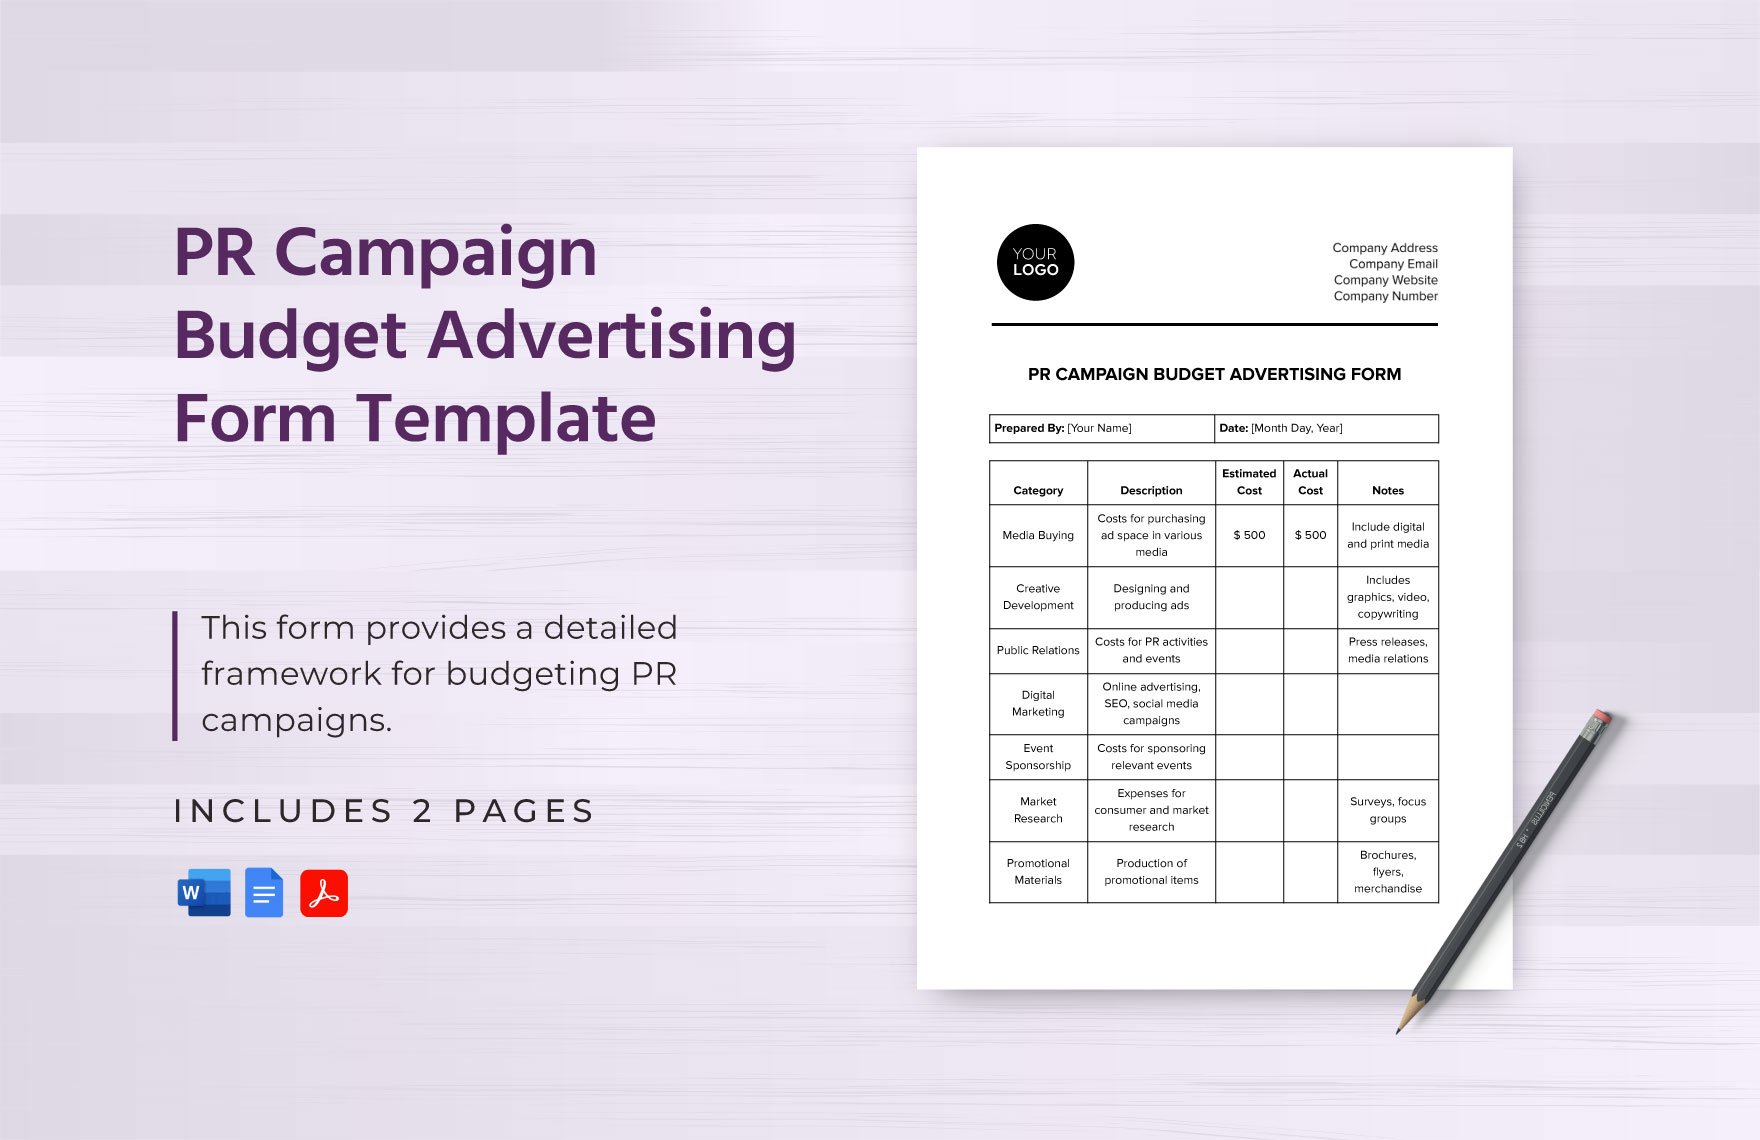 PR Campaign Budget Advertising Form Template